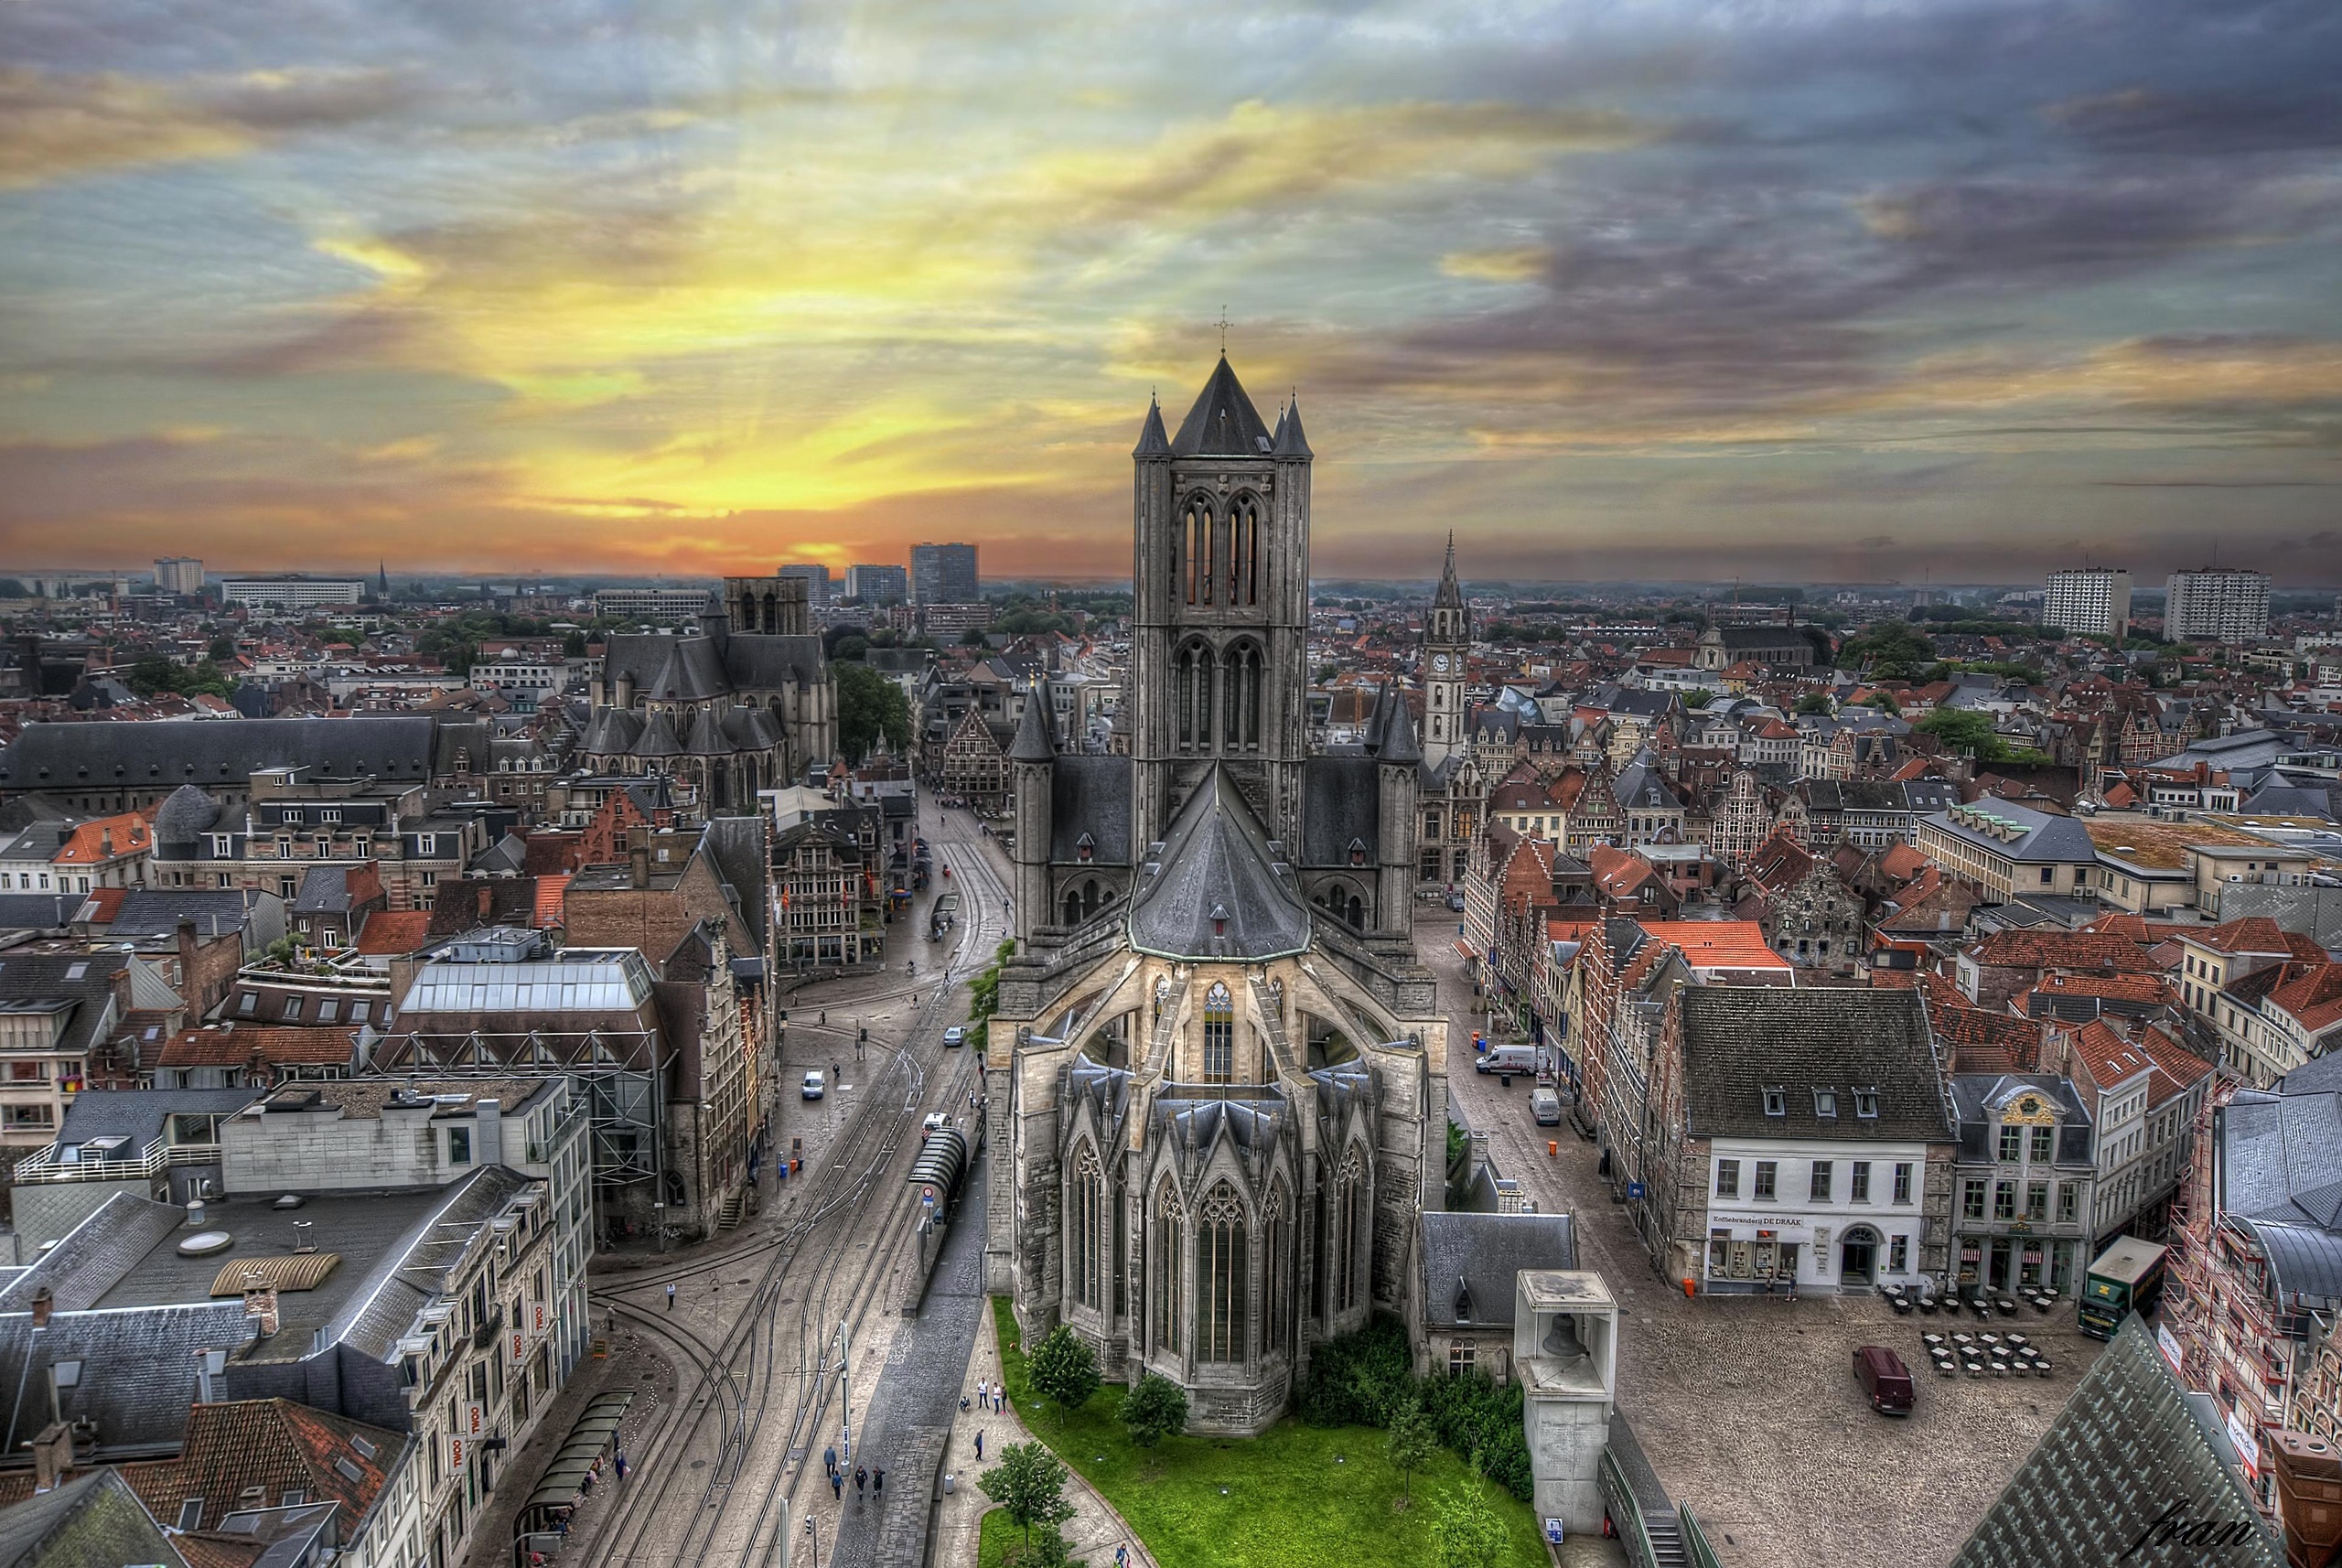 General 2560x1714 city cityscape sky cathedral HDR Belgium St. Nicolas Church, Ghent, Belgium